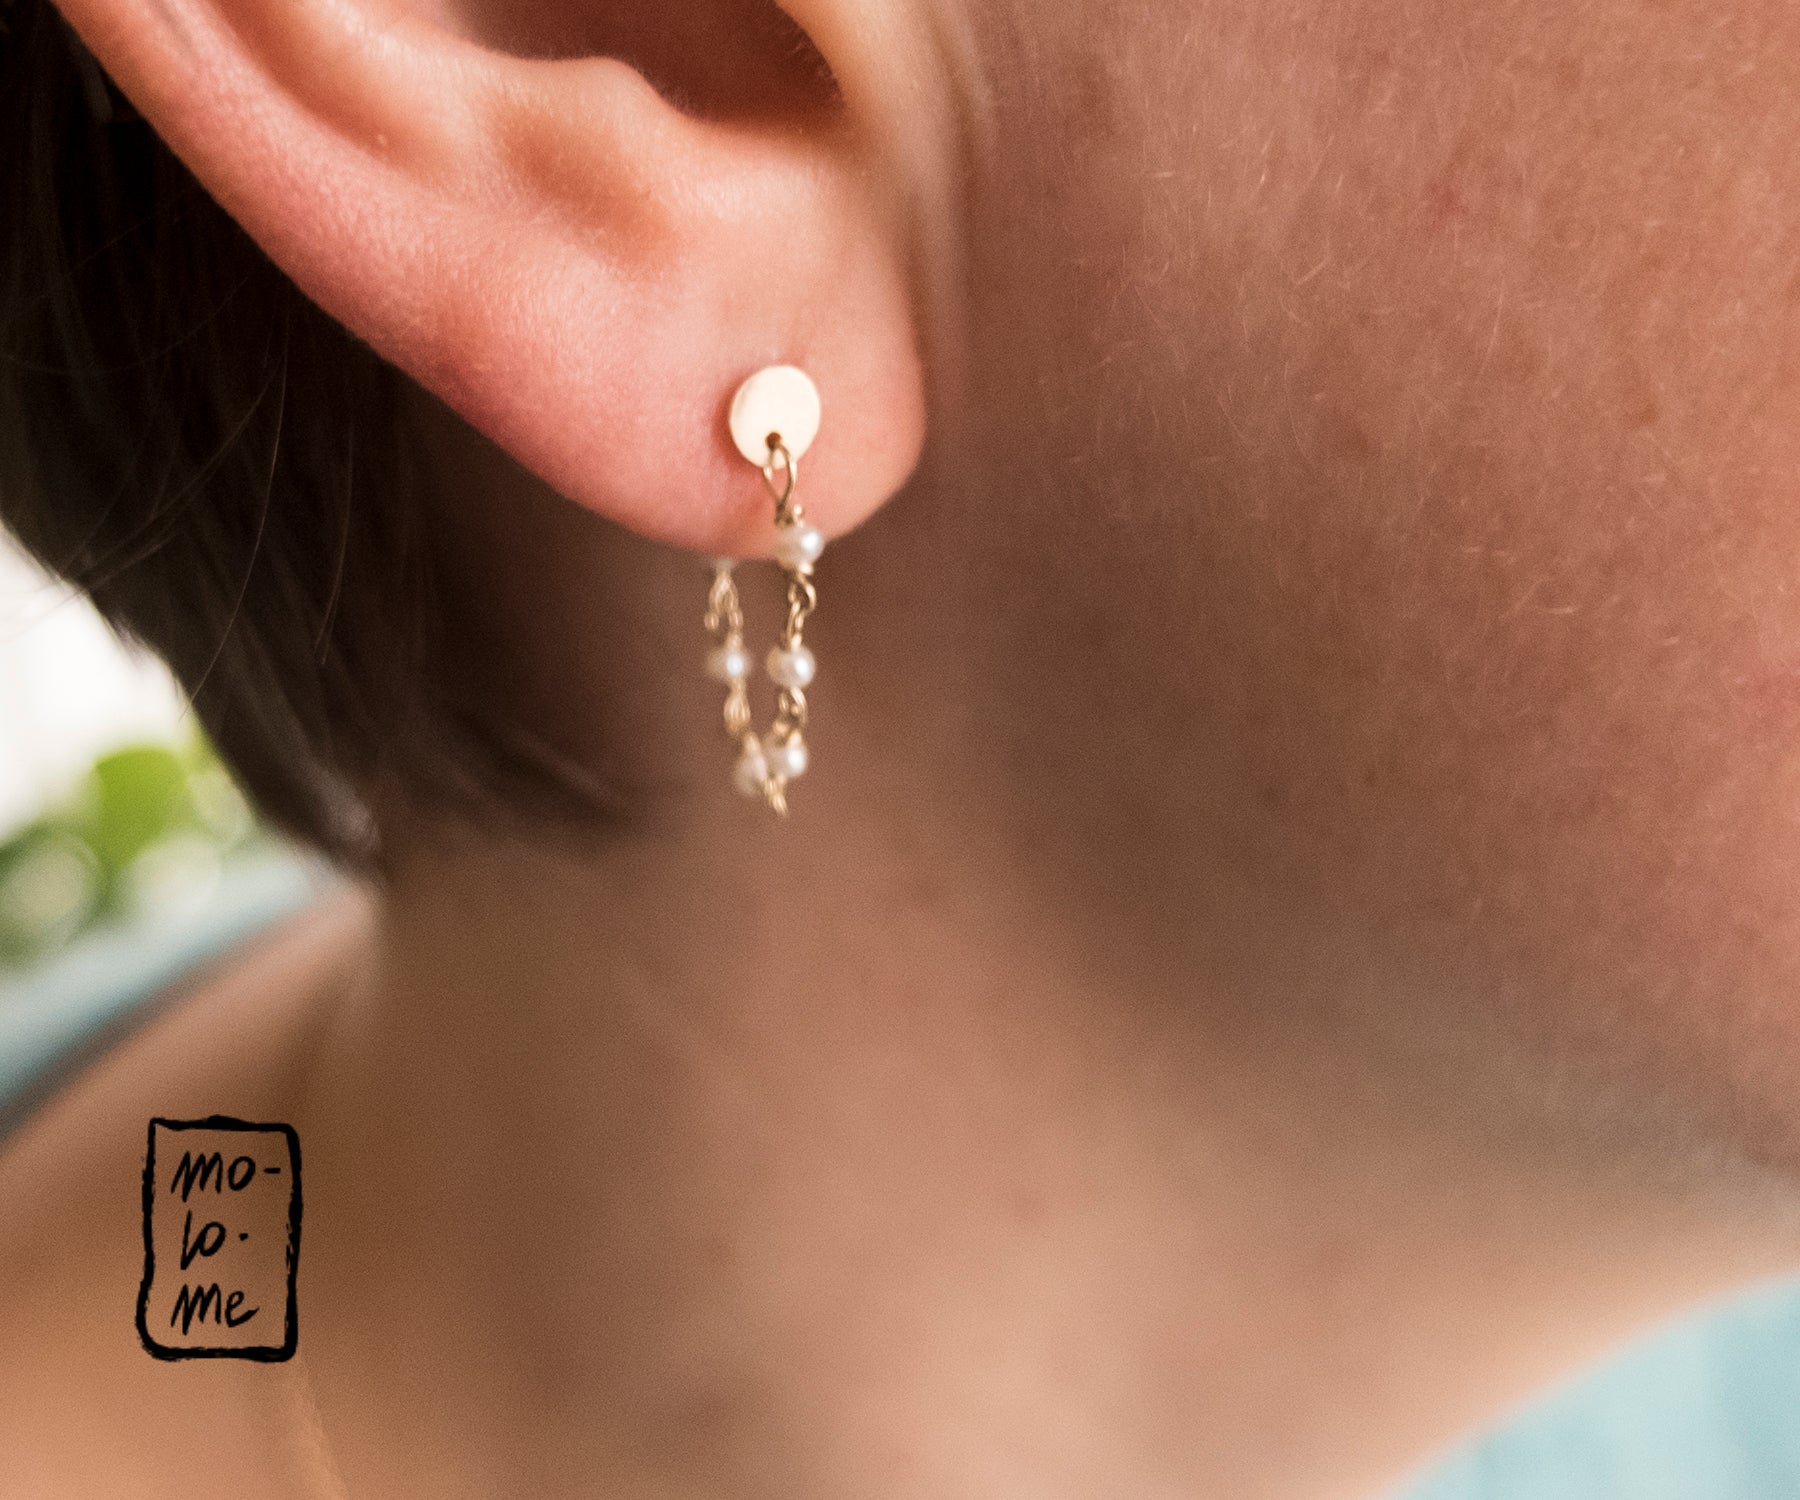 Molo Me Agata Earrings with White Seed Pearls in 9 Carat Gold on model